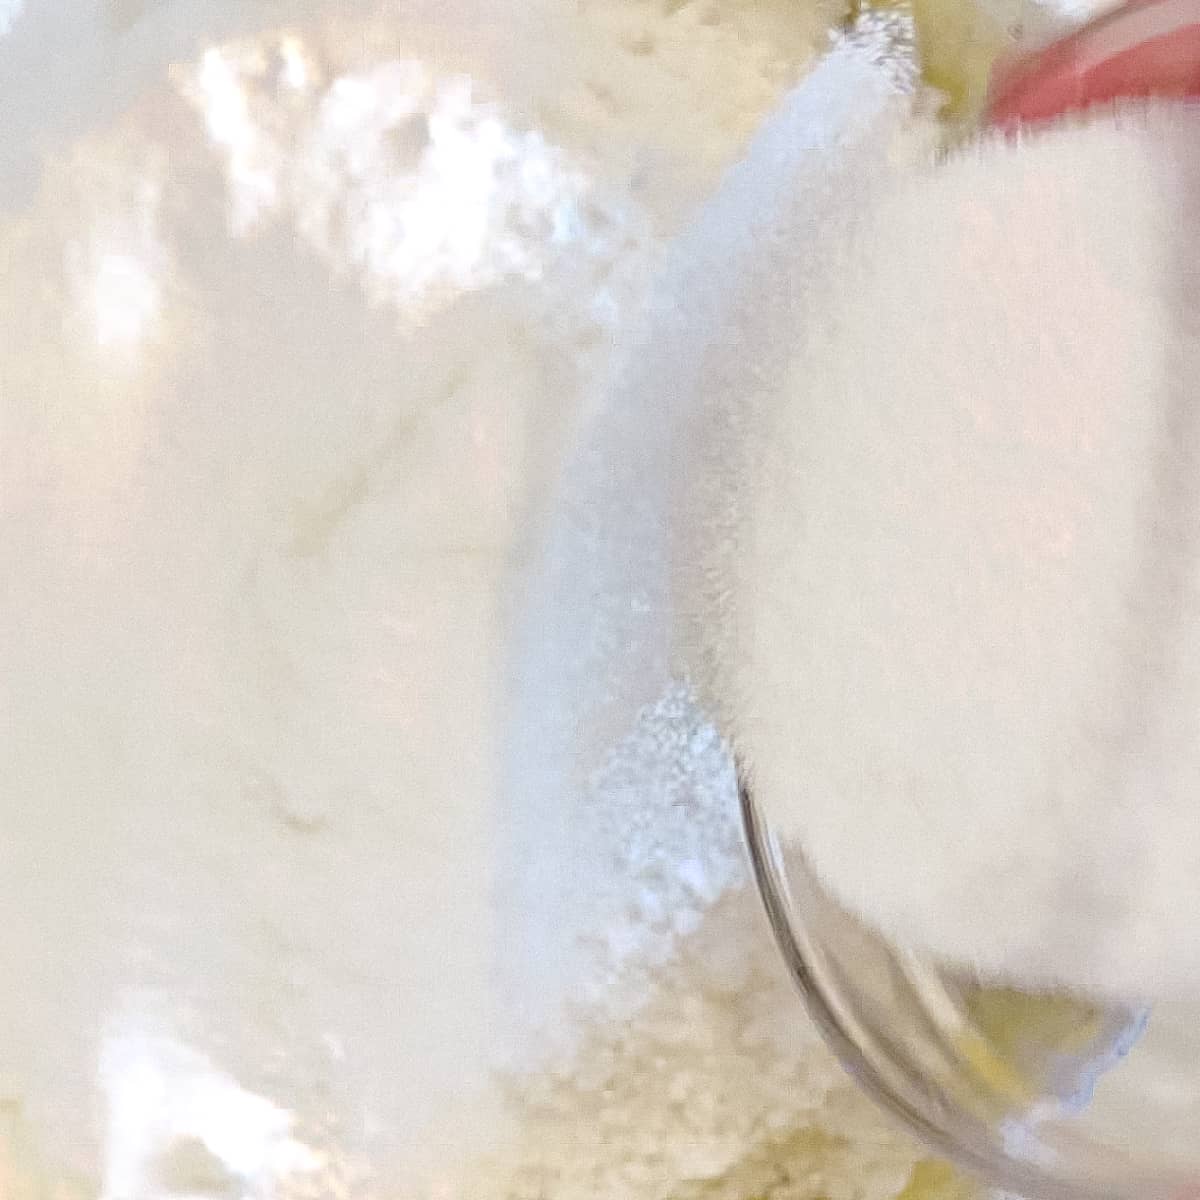 Adding flour and sugar to wet ingredients for one bowl banana bread.